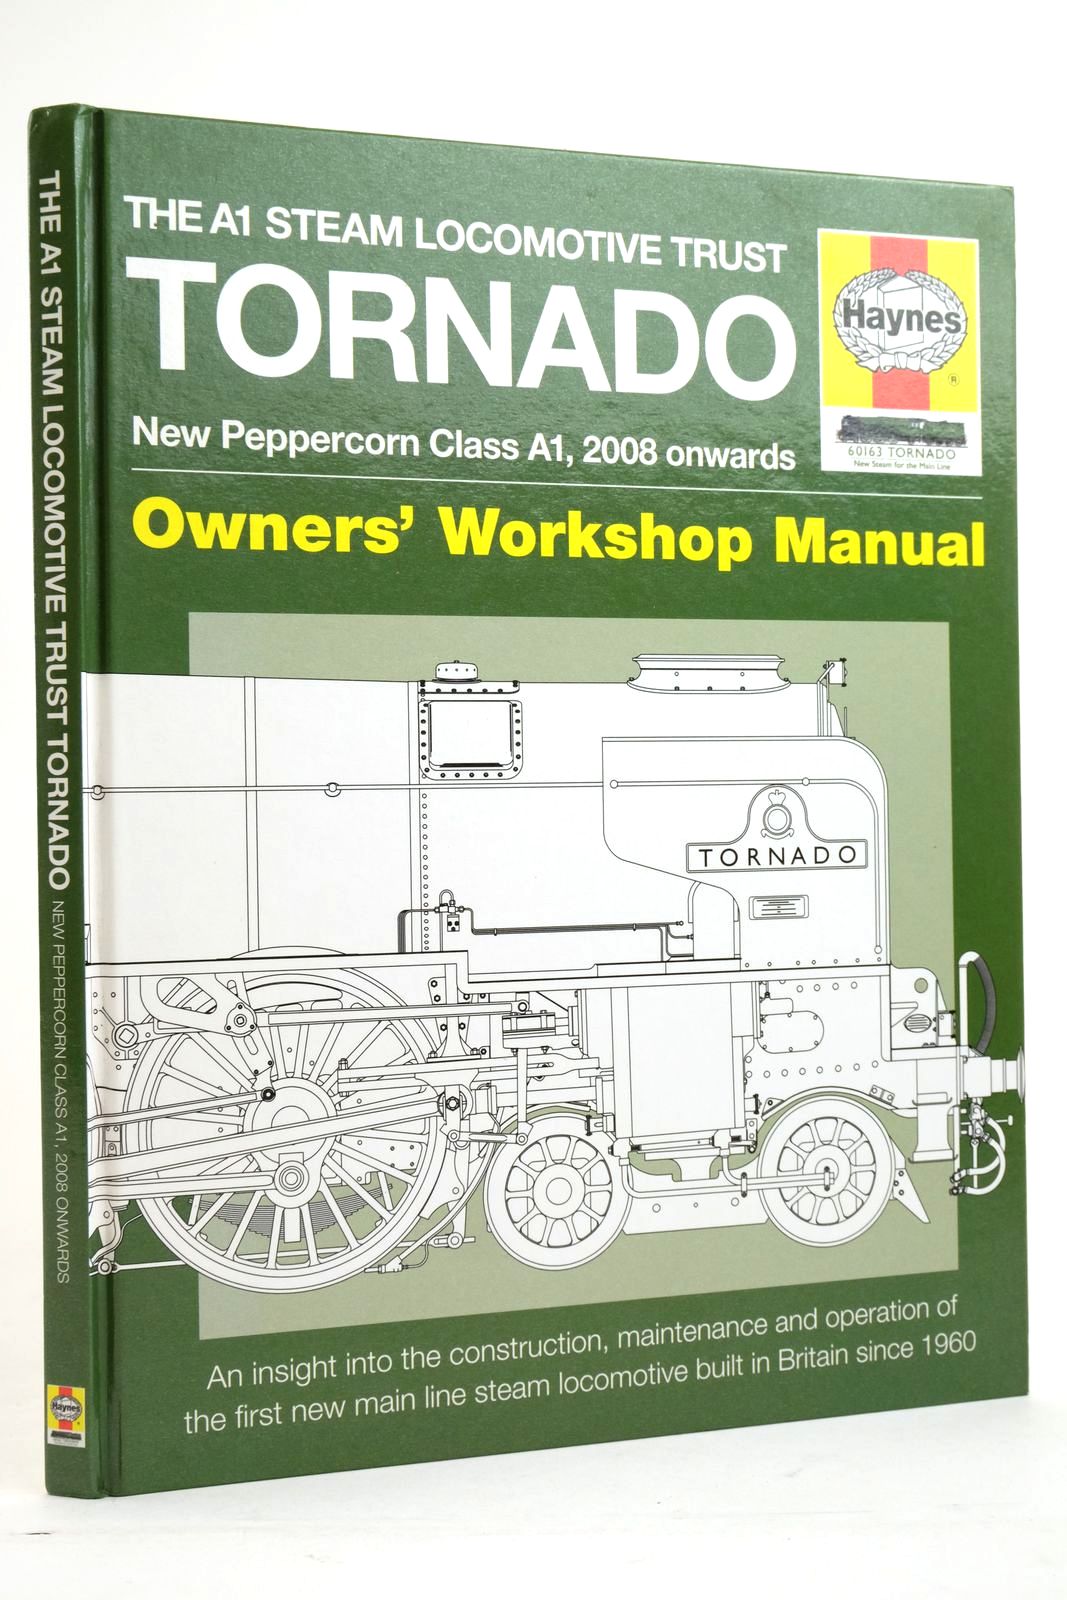 Photo of THE A1 STEAM LOCOMOTIVE TRUST TORNADO NEW PEPPERCORN CLASS A1, 2008 ONWARDS OWNDERS' WORKSHOP MANUAL- Stock Number: 2135991